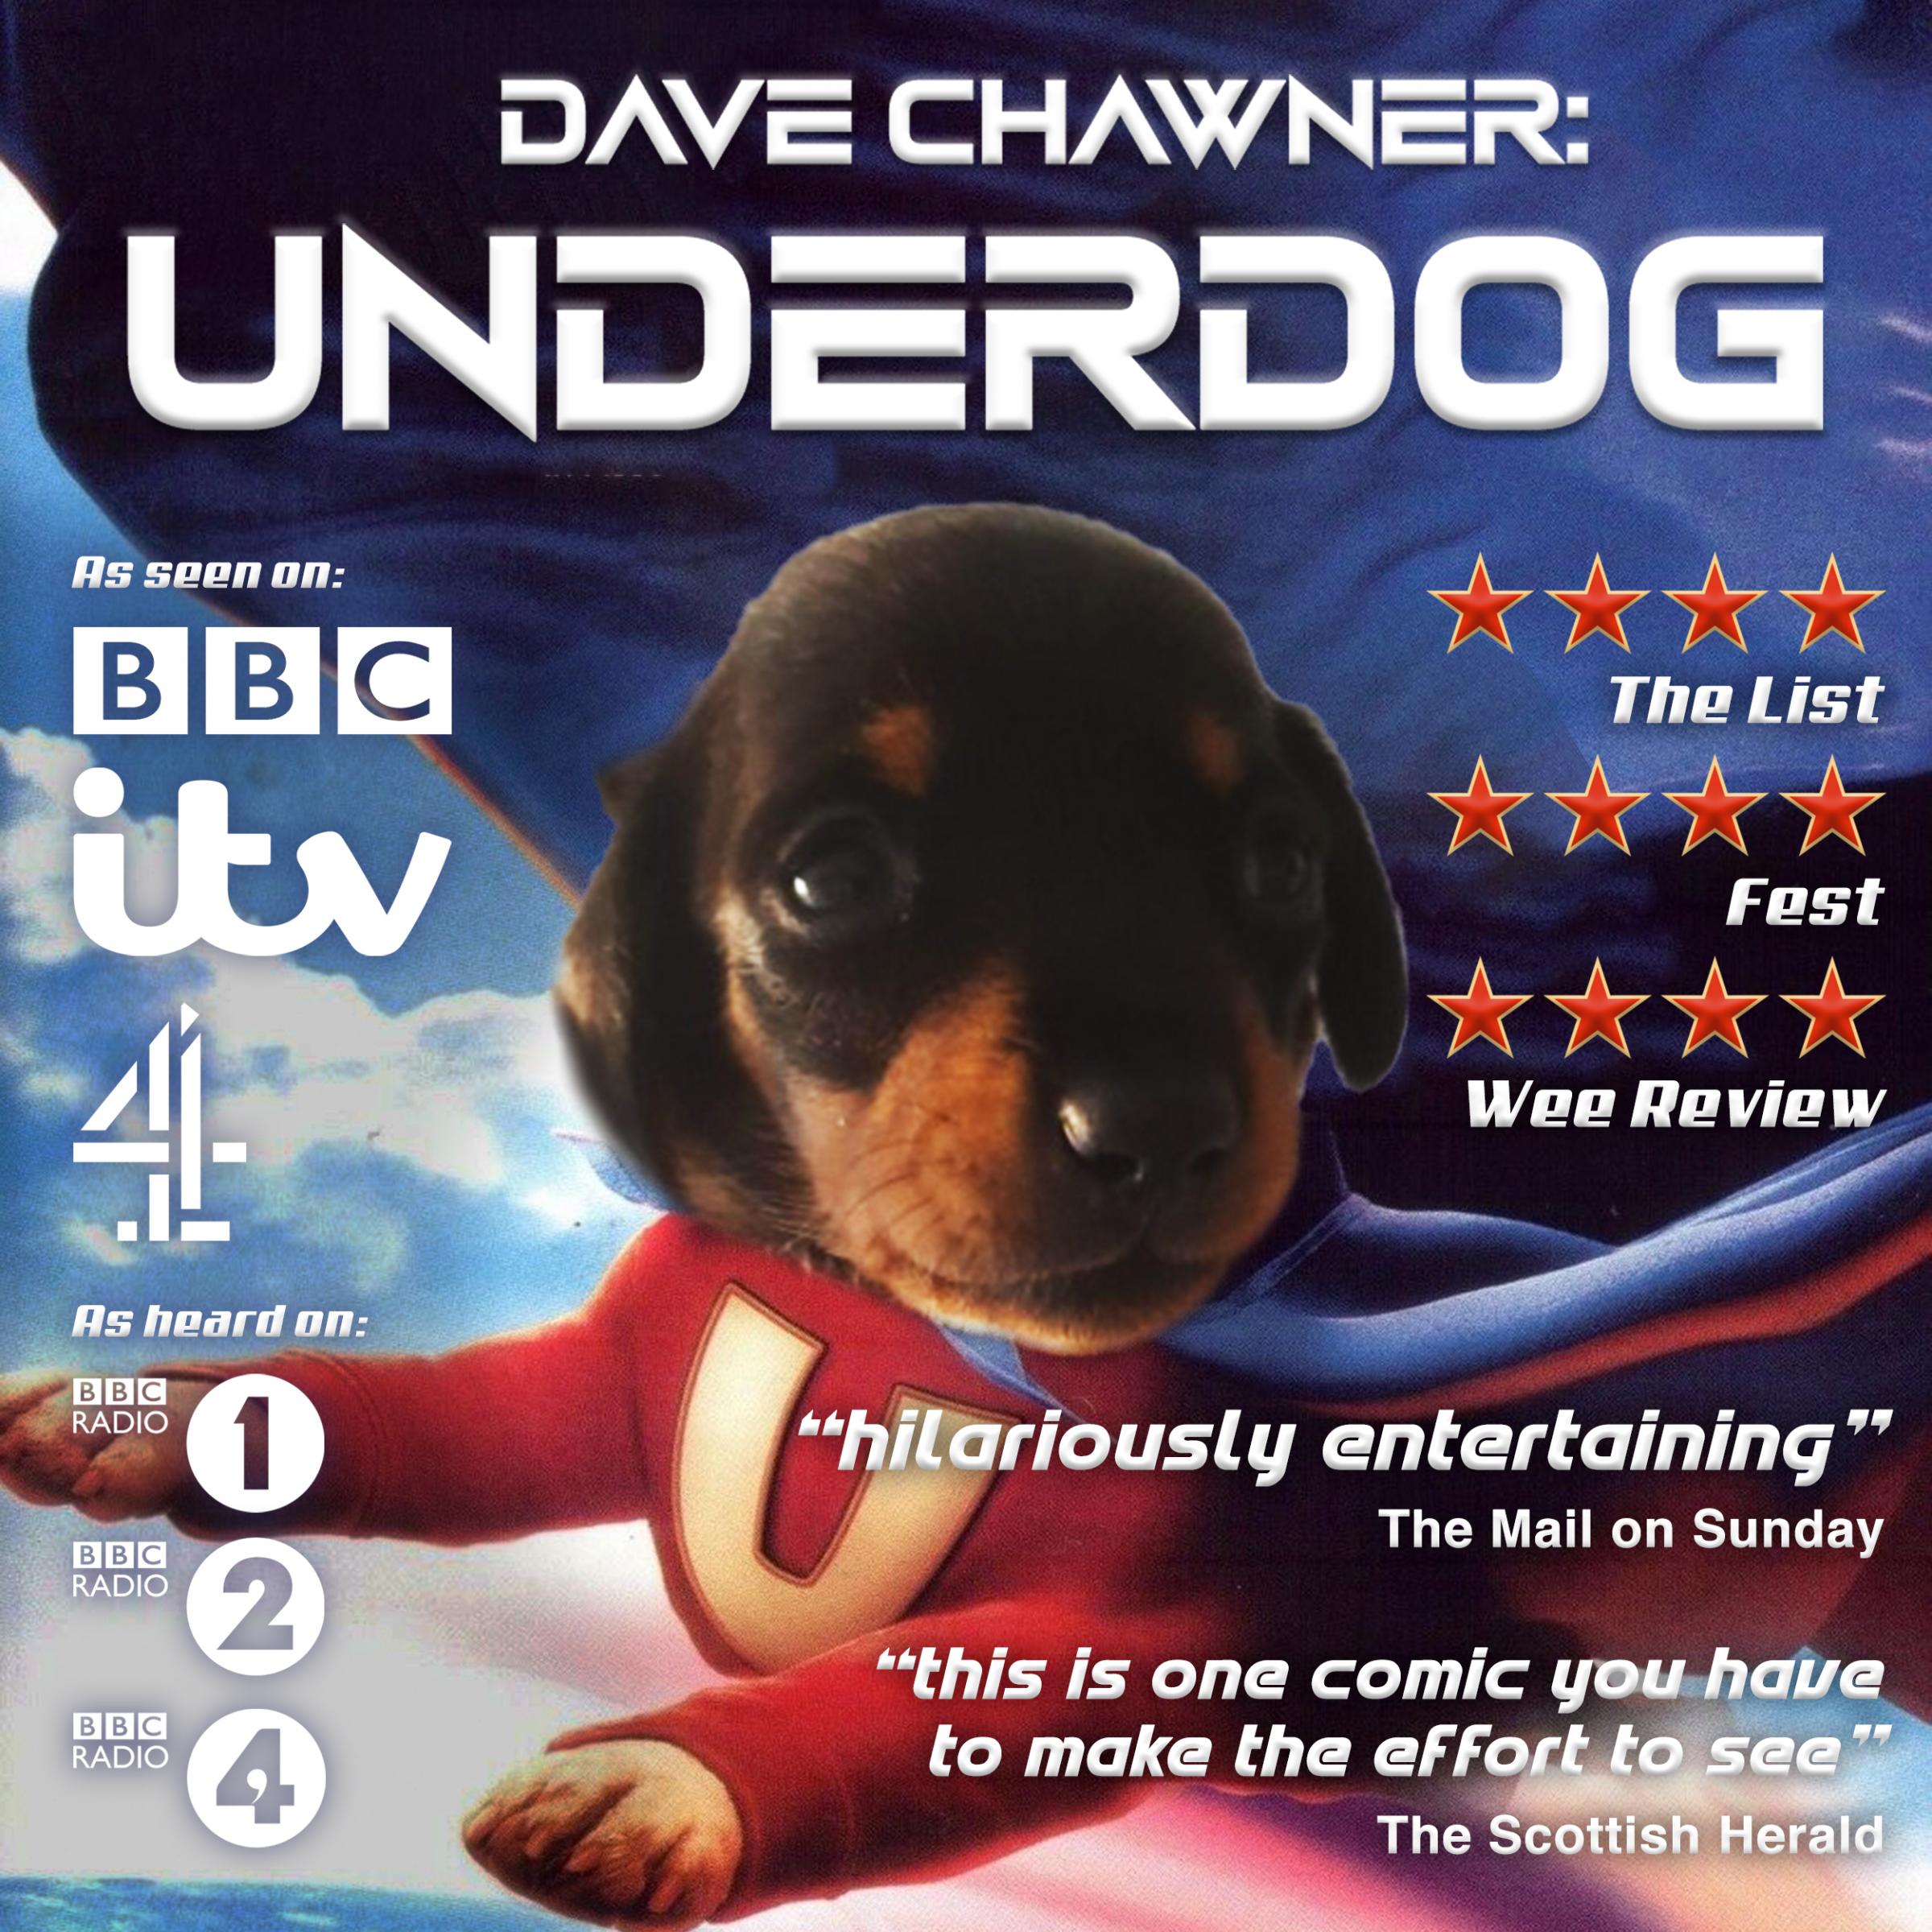 Dave Chawner is appearing at The Brighton Fringe with his comedy show Underdog, staged at The Quadrant in North Street in May and June